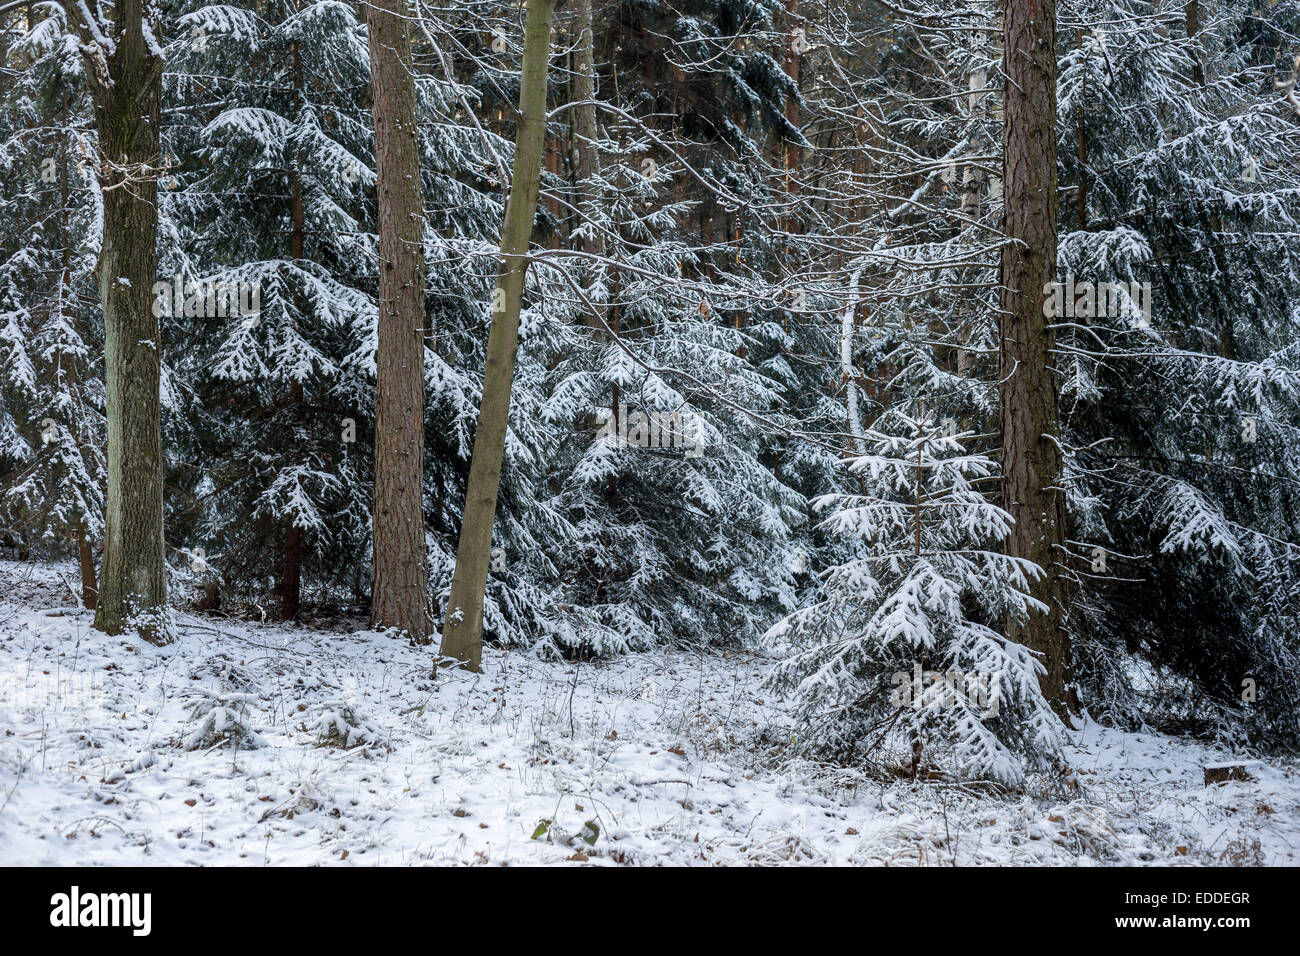 Spruce tree trees forest covered with snow Stock Photo